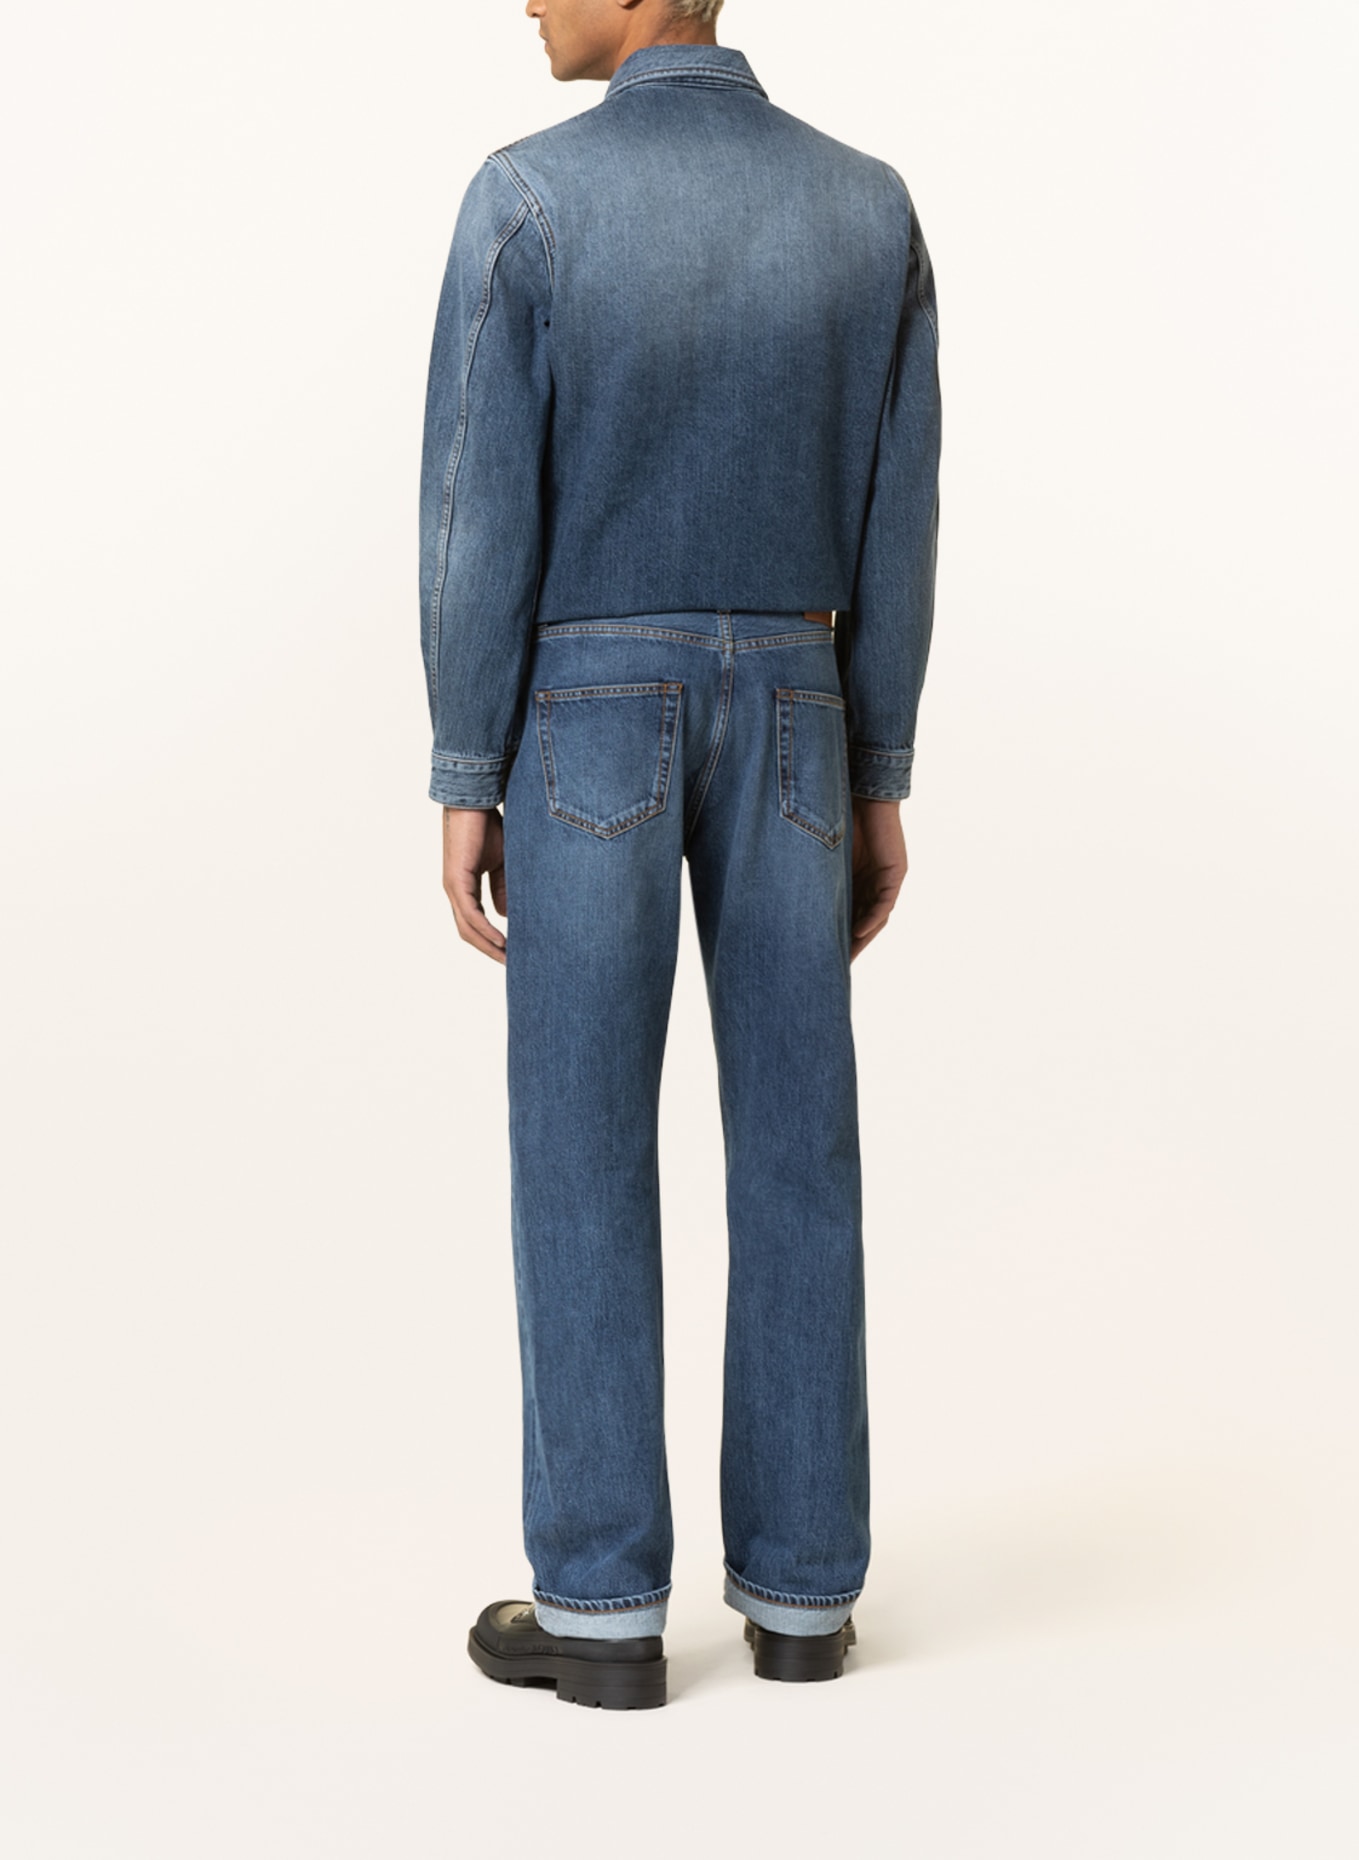 Alexander McQUEEN Jeans Straight Fit, Farbe: 4001 BLUE WASHED (Bild 3)